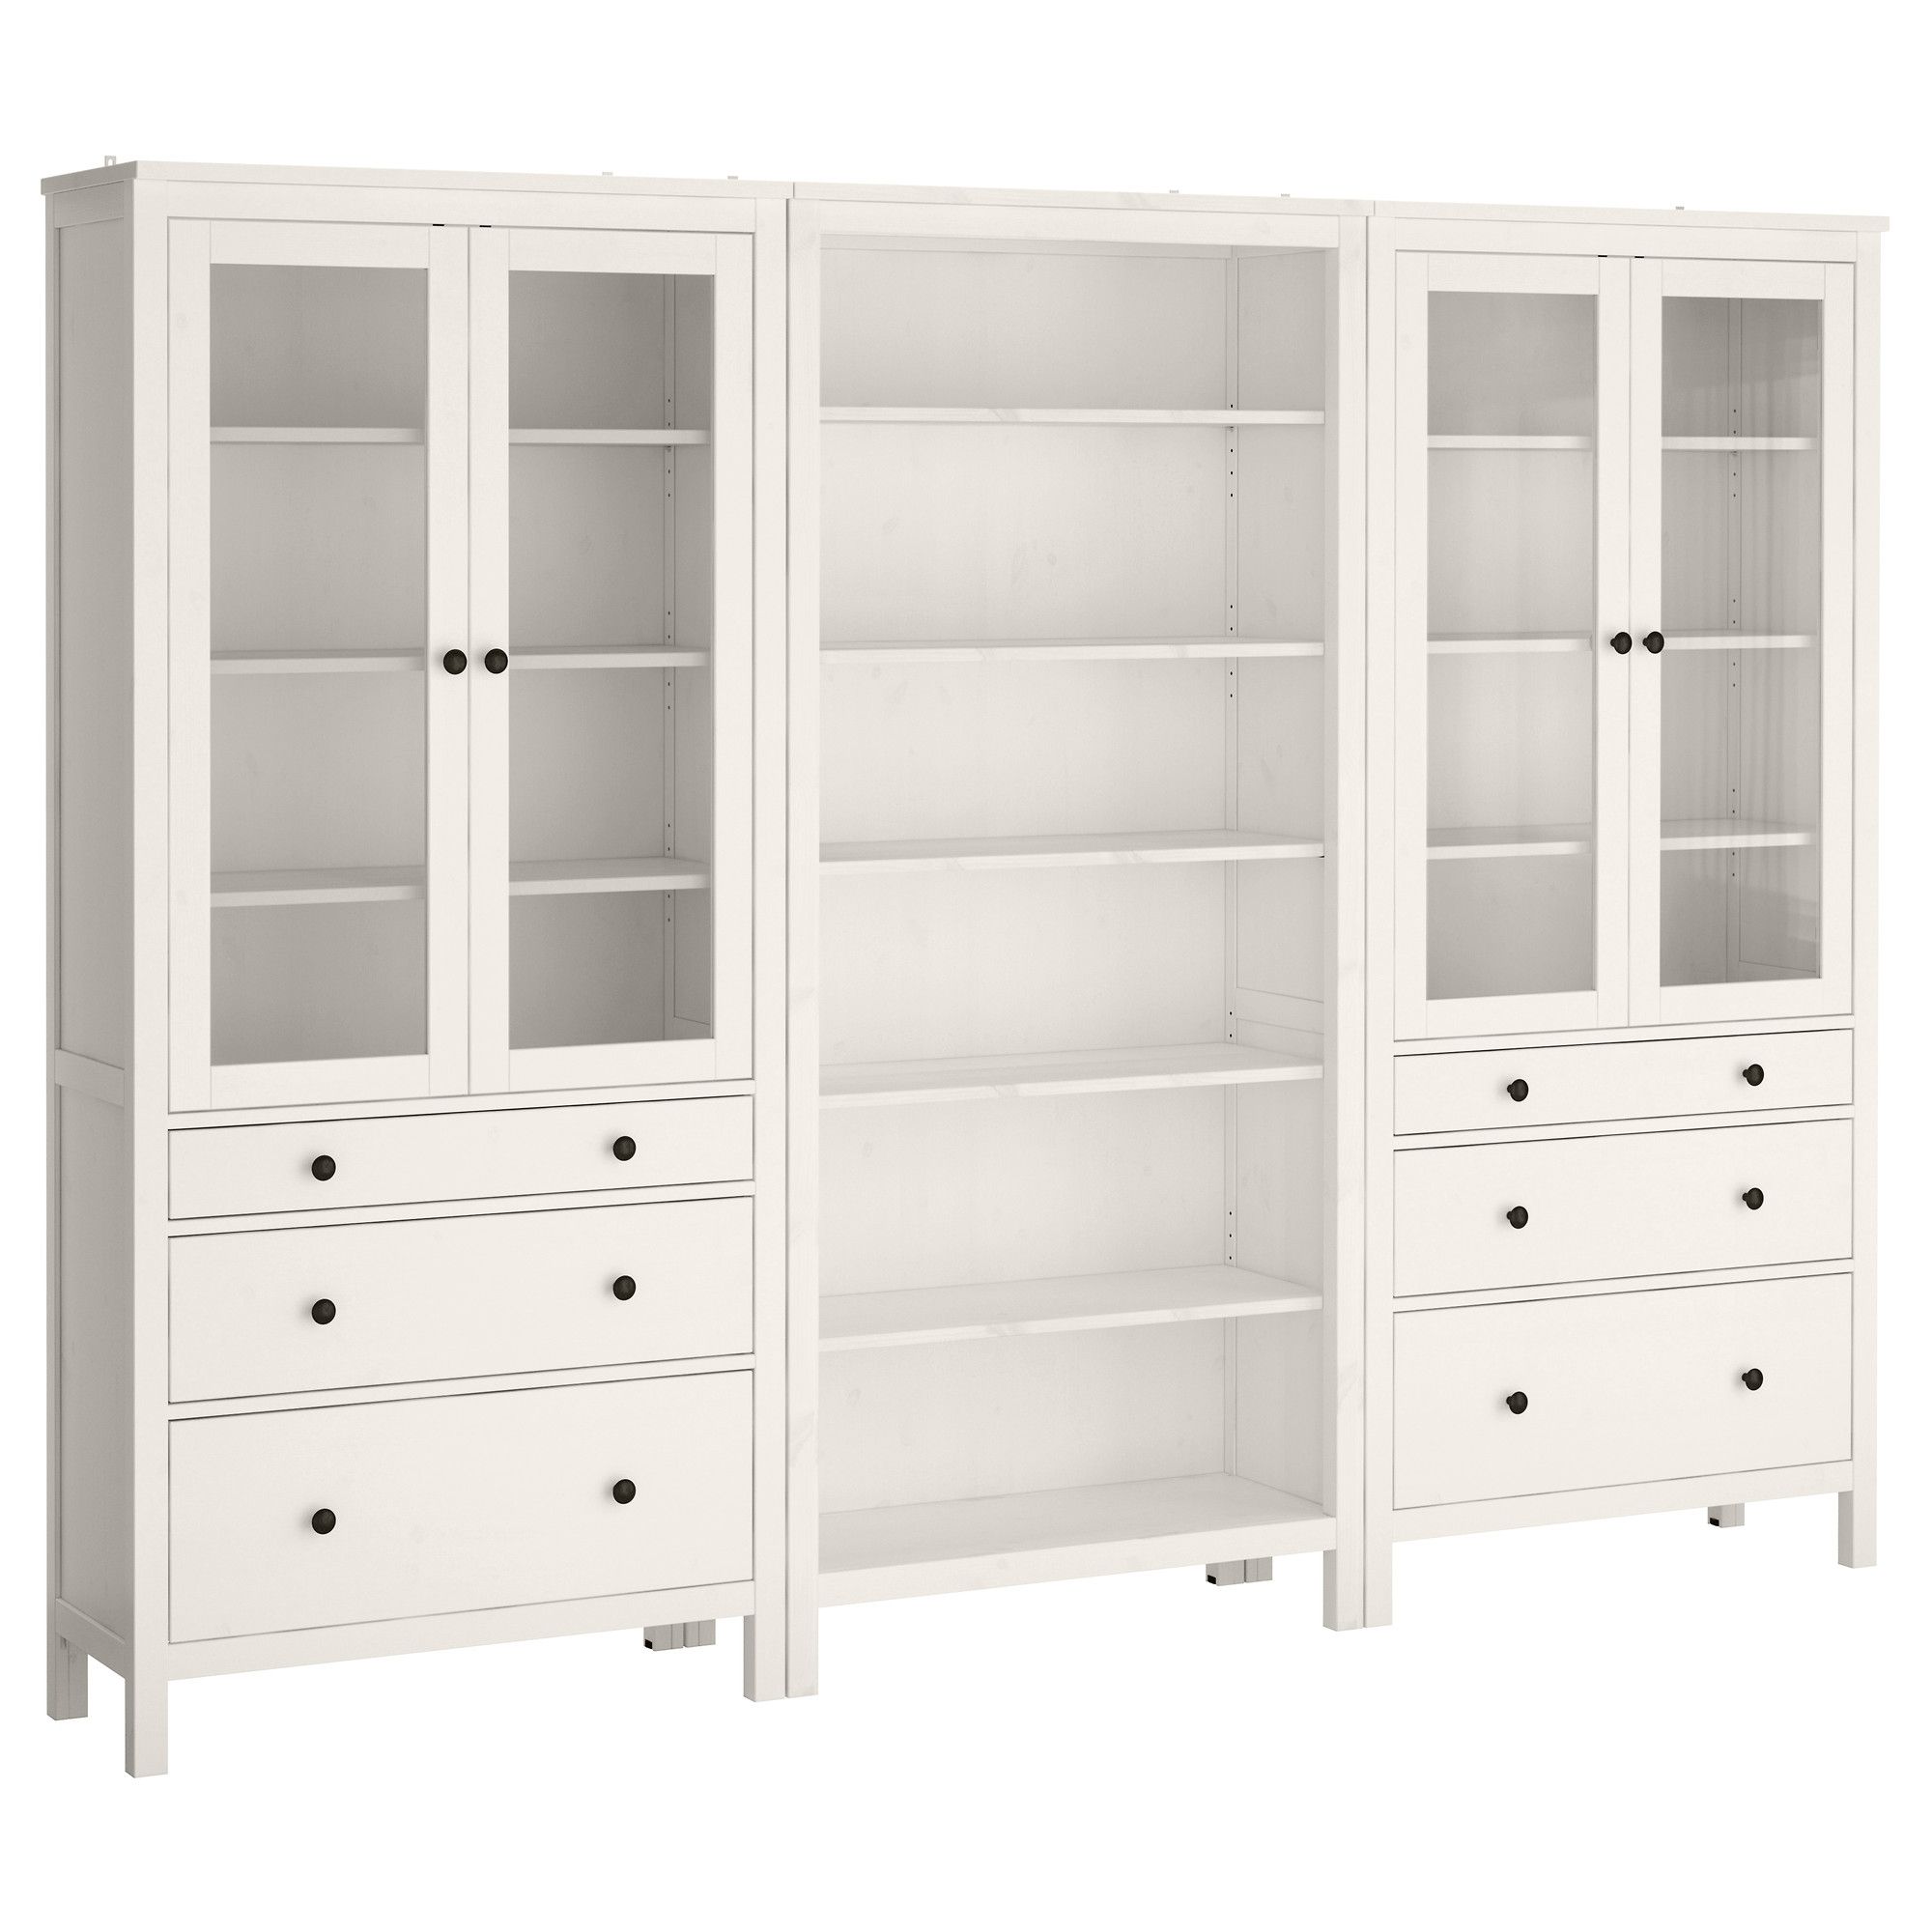 Bookcases With Drawers In Well Known Hemnes Storage Combination W Doors/drawers – White Stain – Ikea (View 8 of 15)